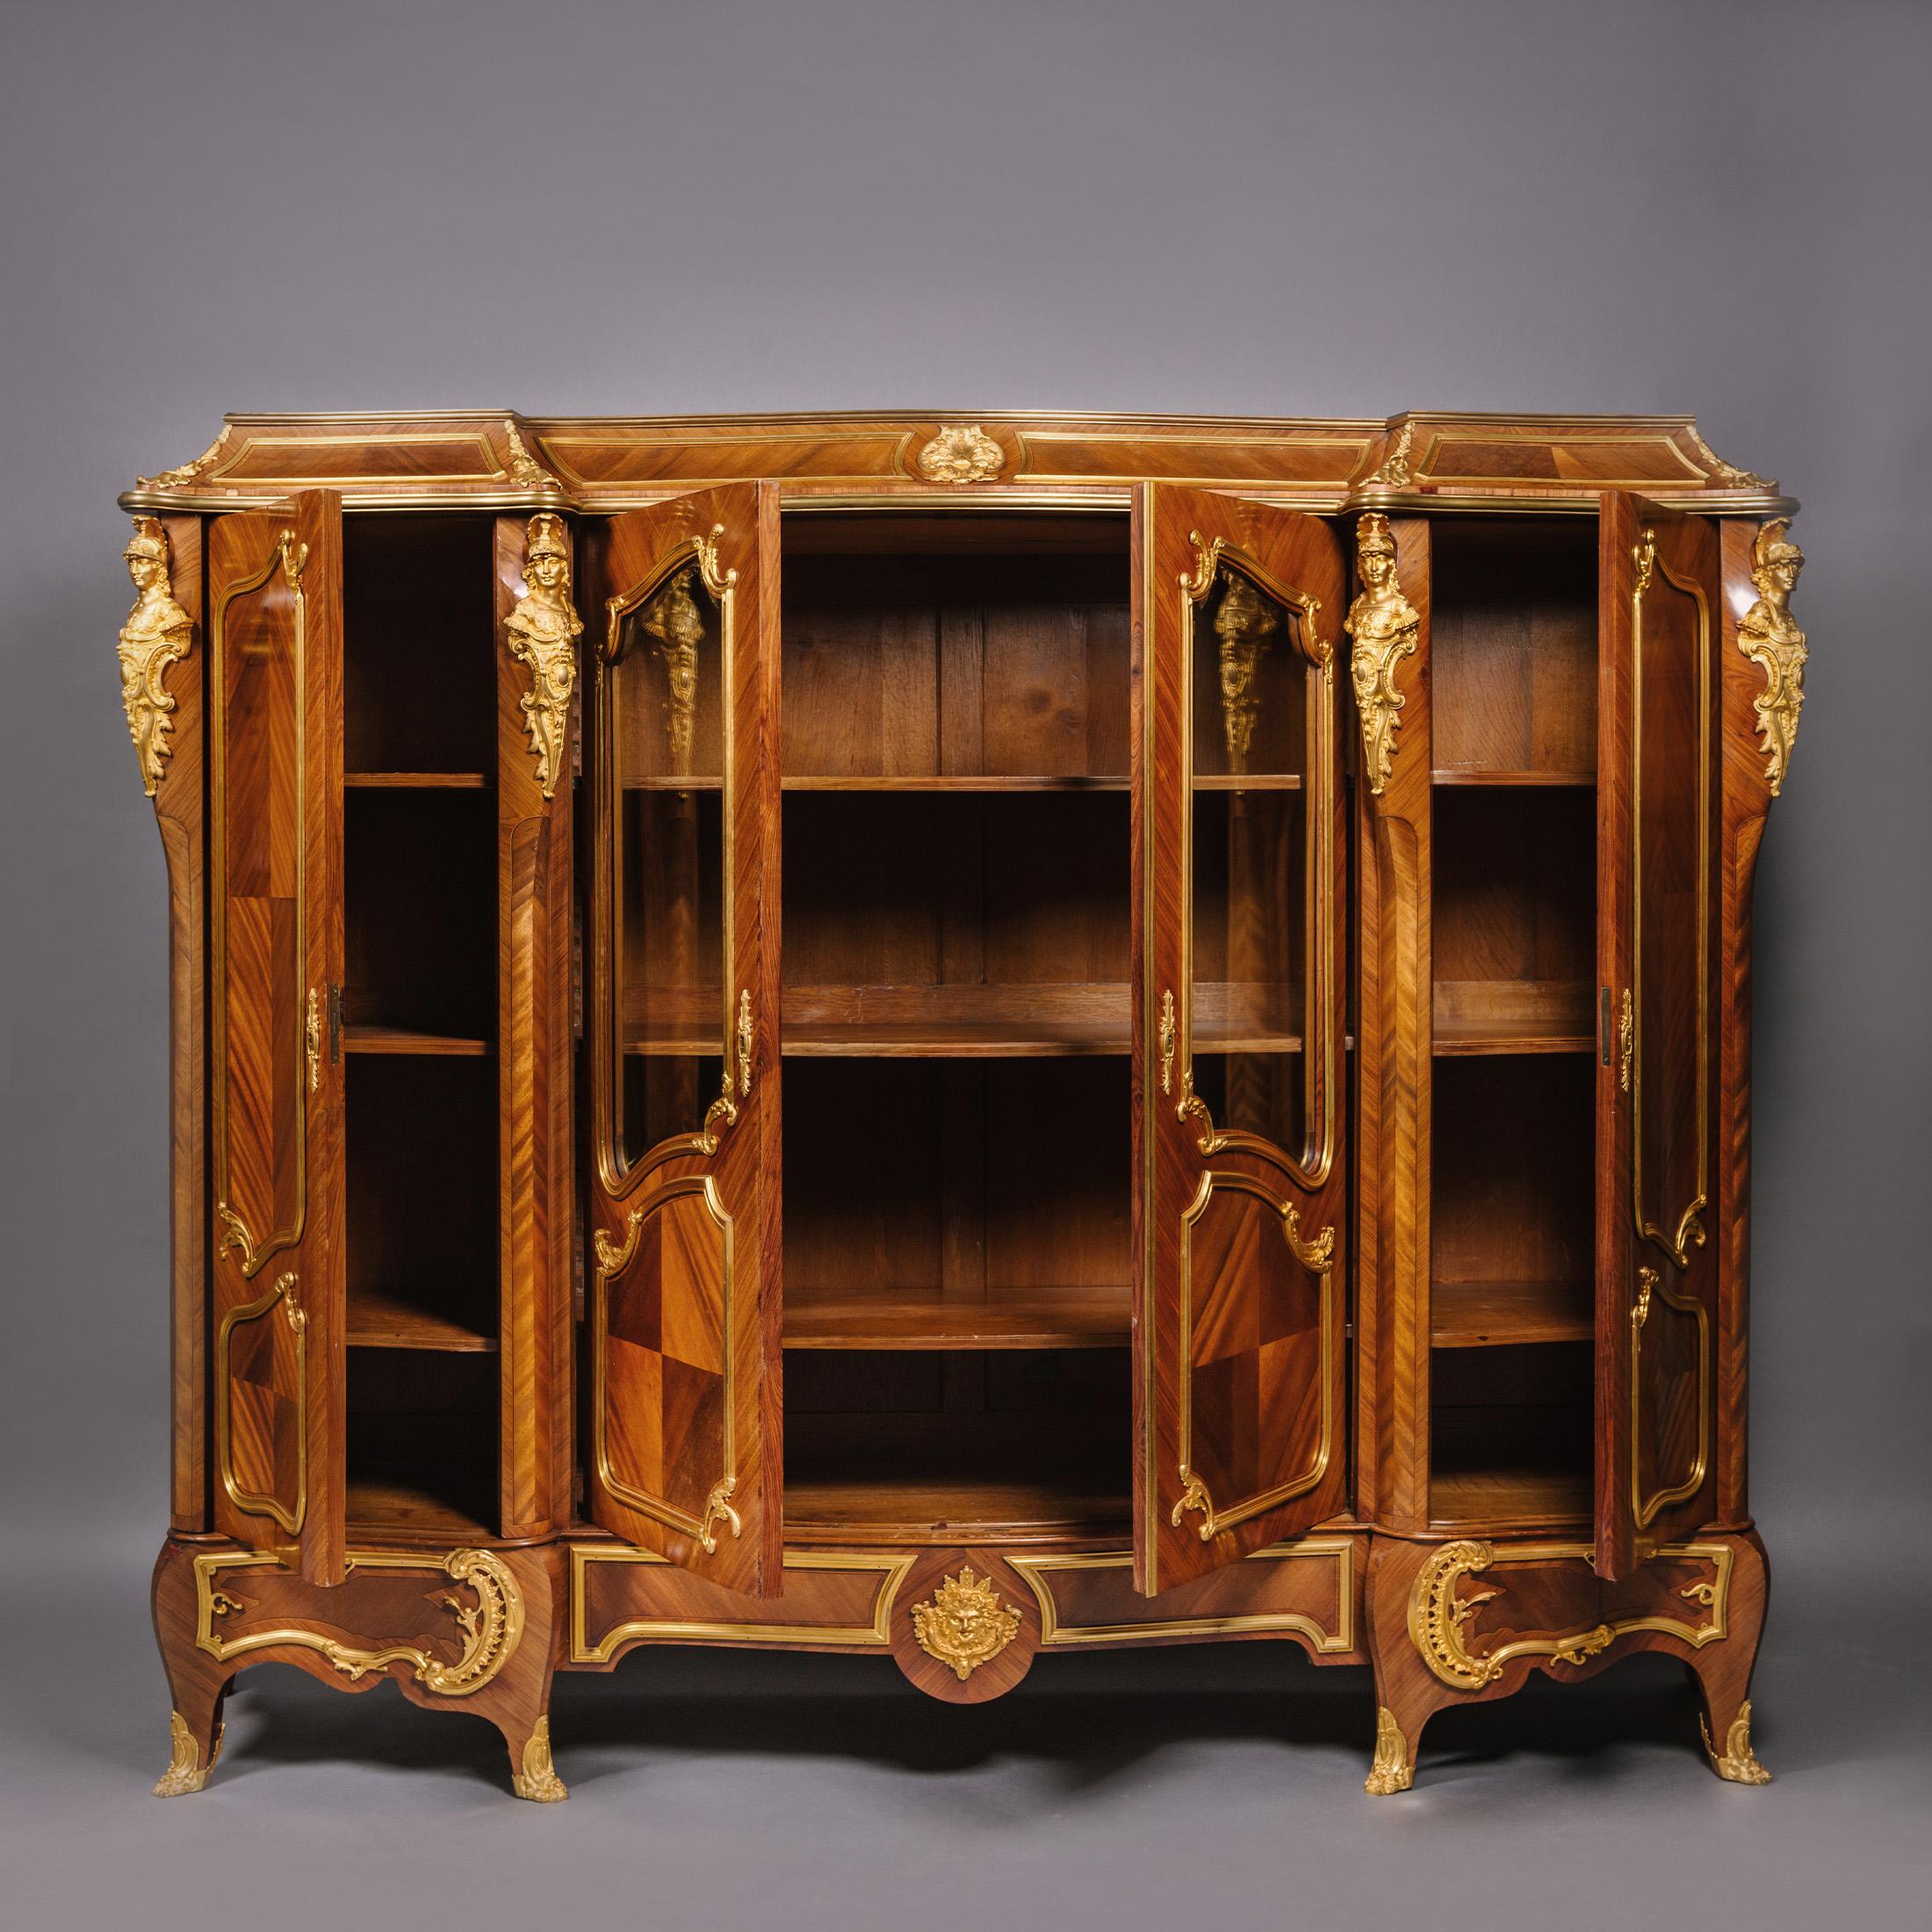 Louis XV Style Gilt-Bronze Mounted Bibliotheque, Attributed to François Linke In Good Condition For Sale In Brighton, West Sussex